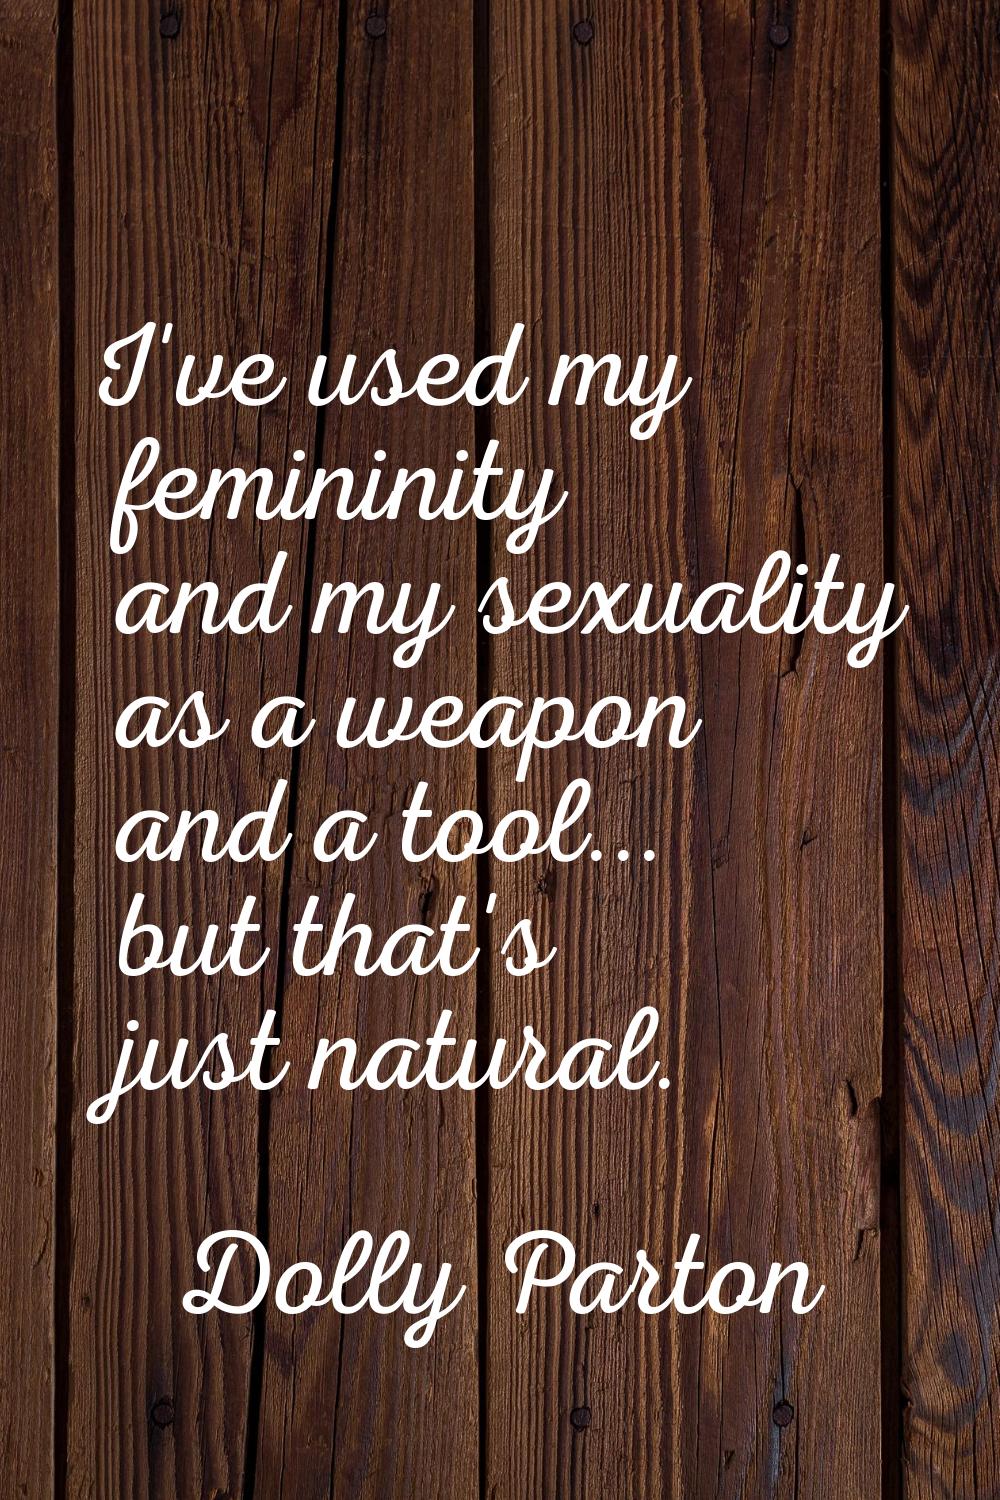 I've used my femininity and my sexuality as a weapon and a tool... but that's just natural.